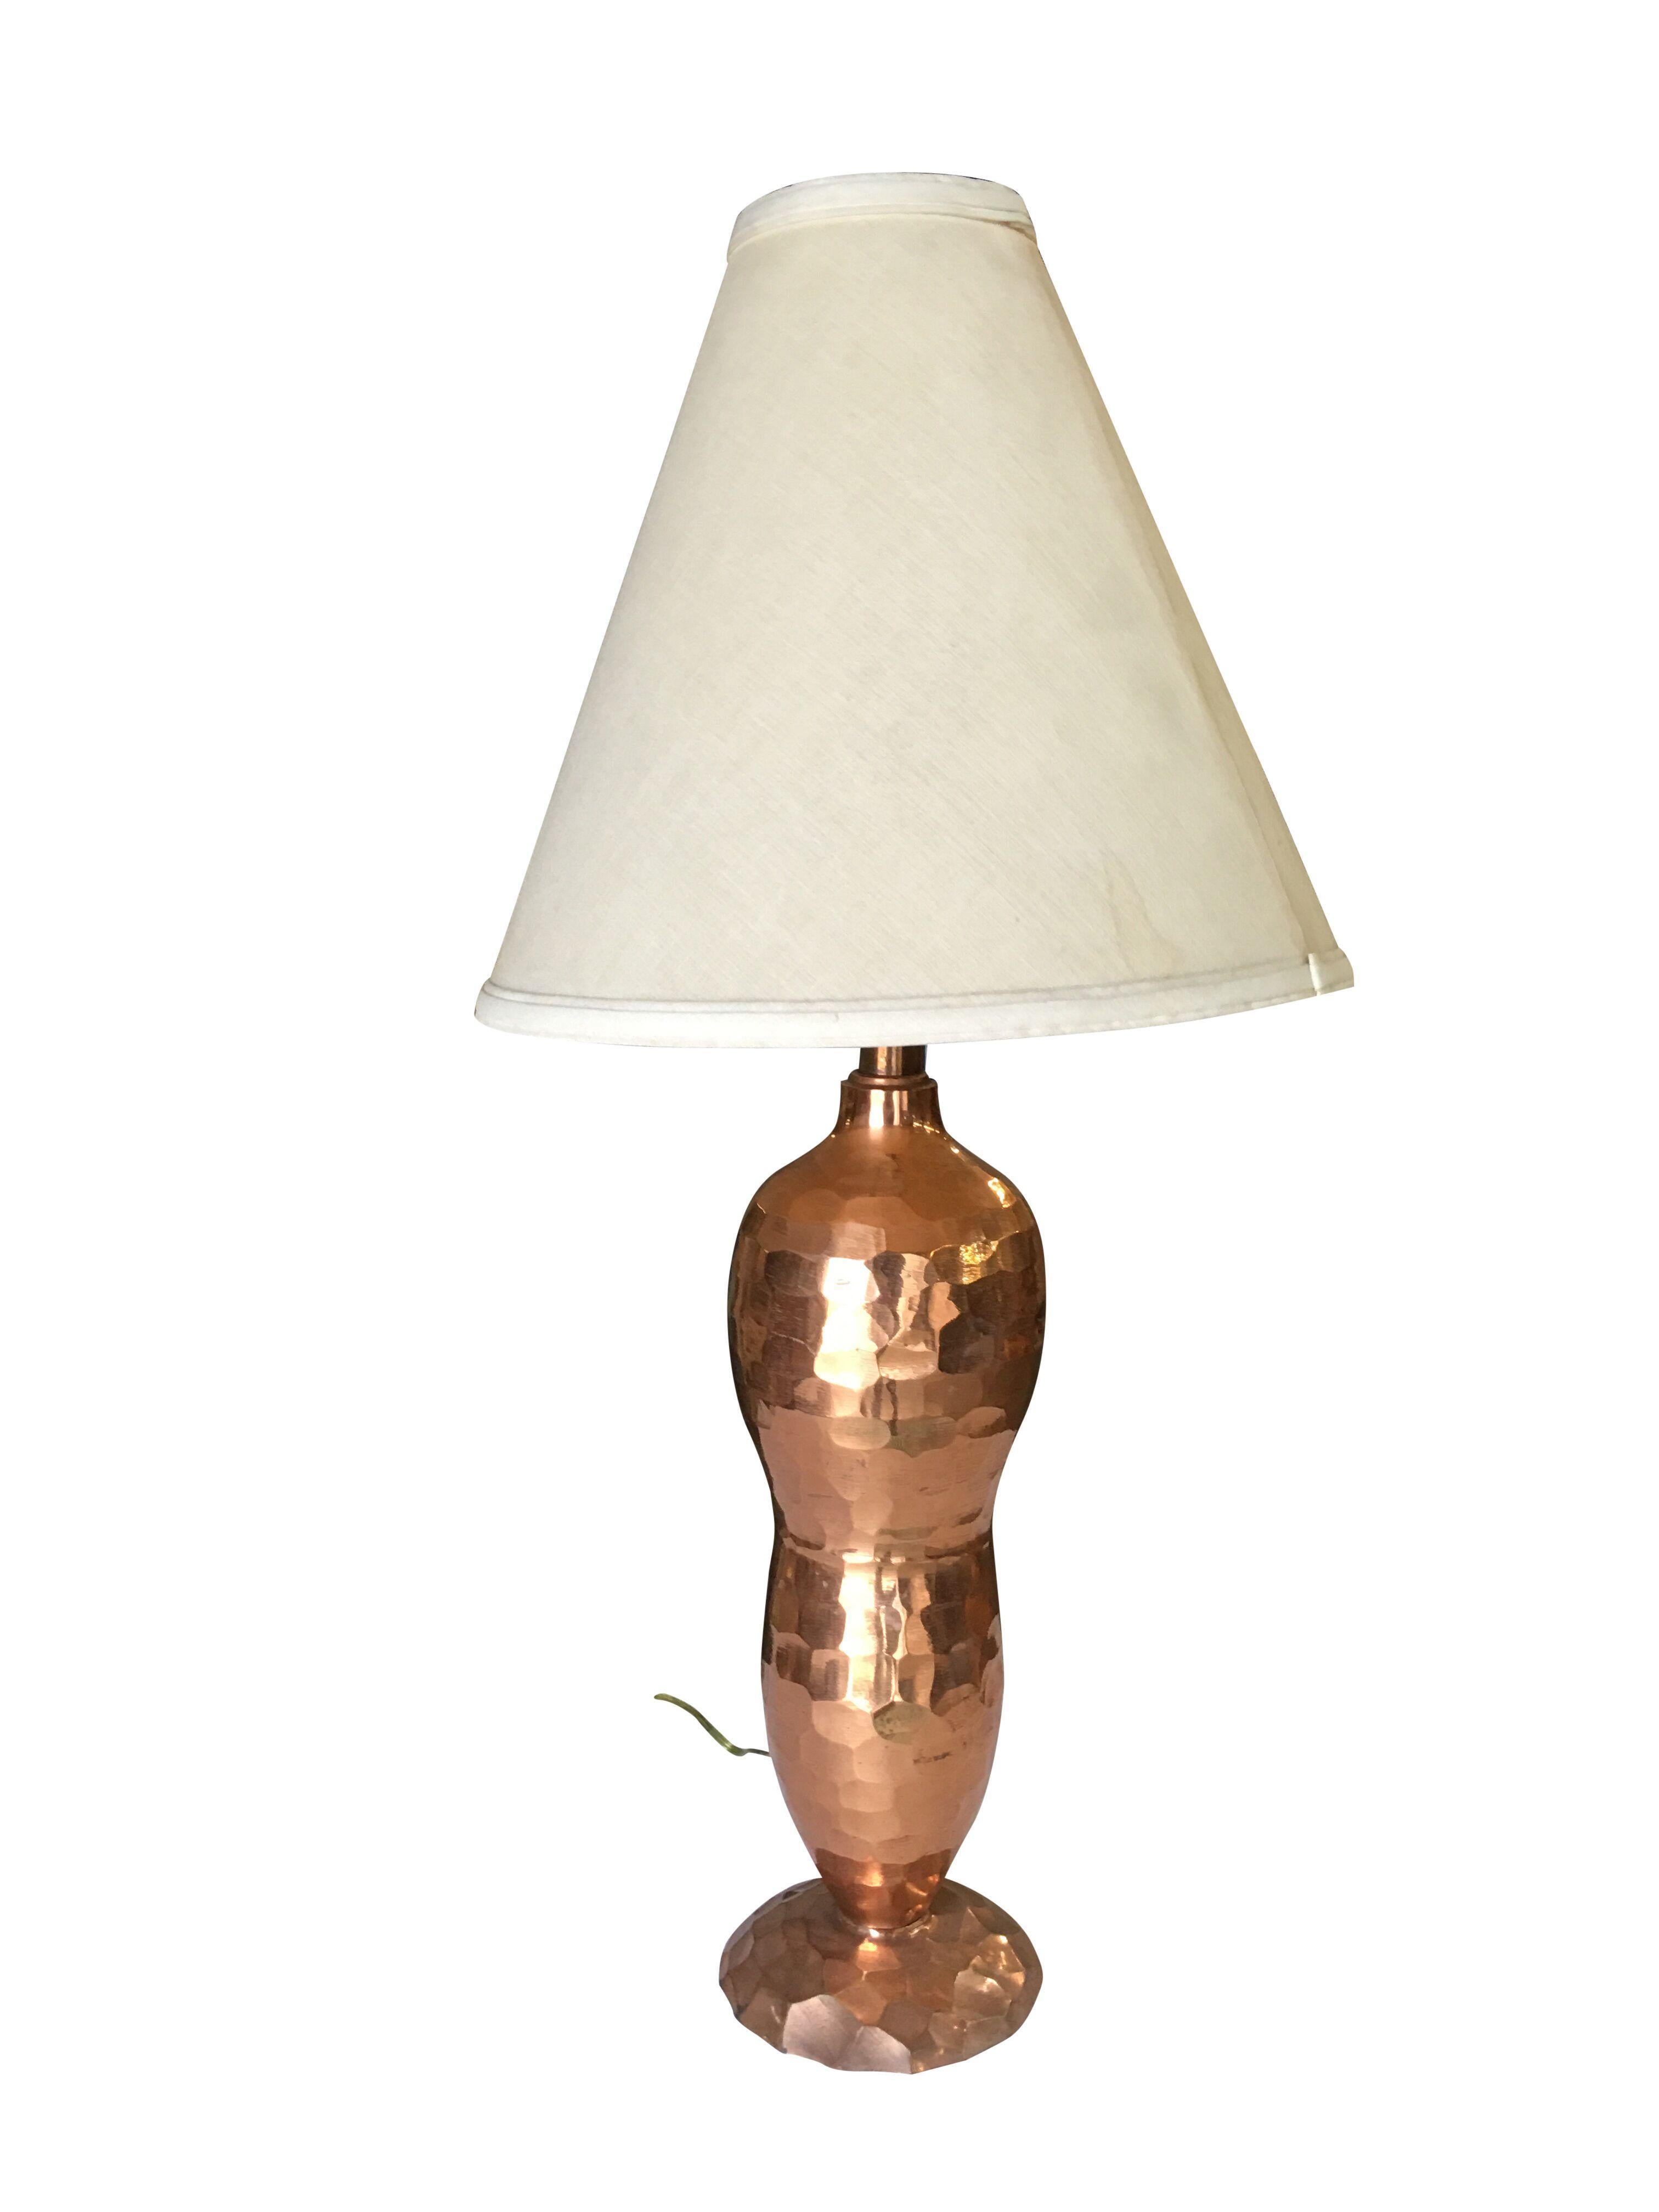 Mission inspired hand-hammered copper lamp pair. The set features two lamps, hand-hammered copper, bottle-shaped lamps with a single light on top.